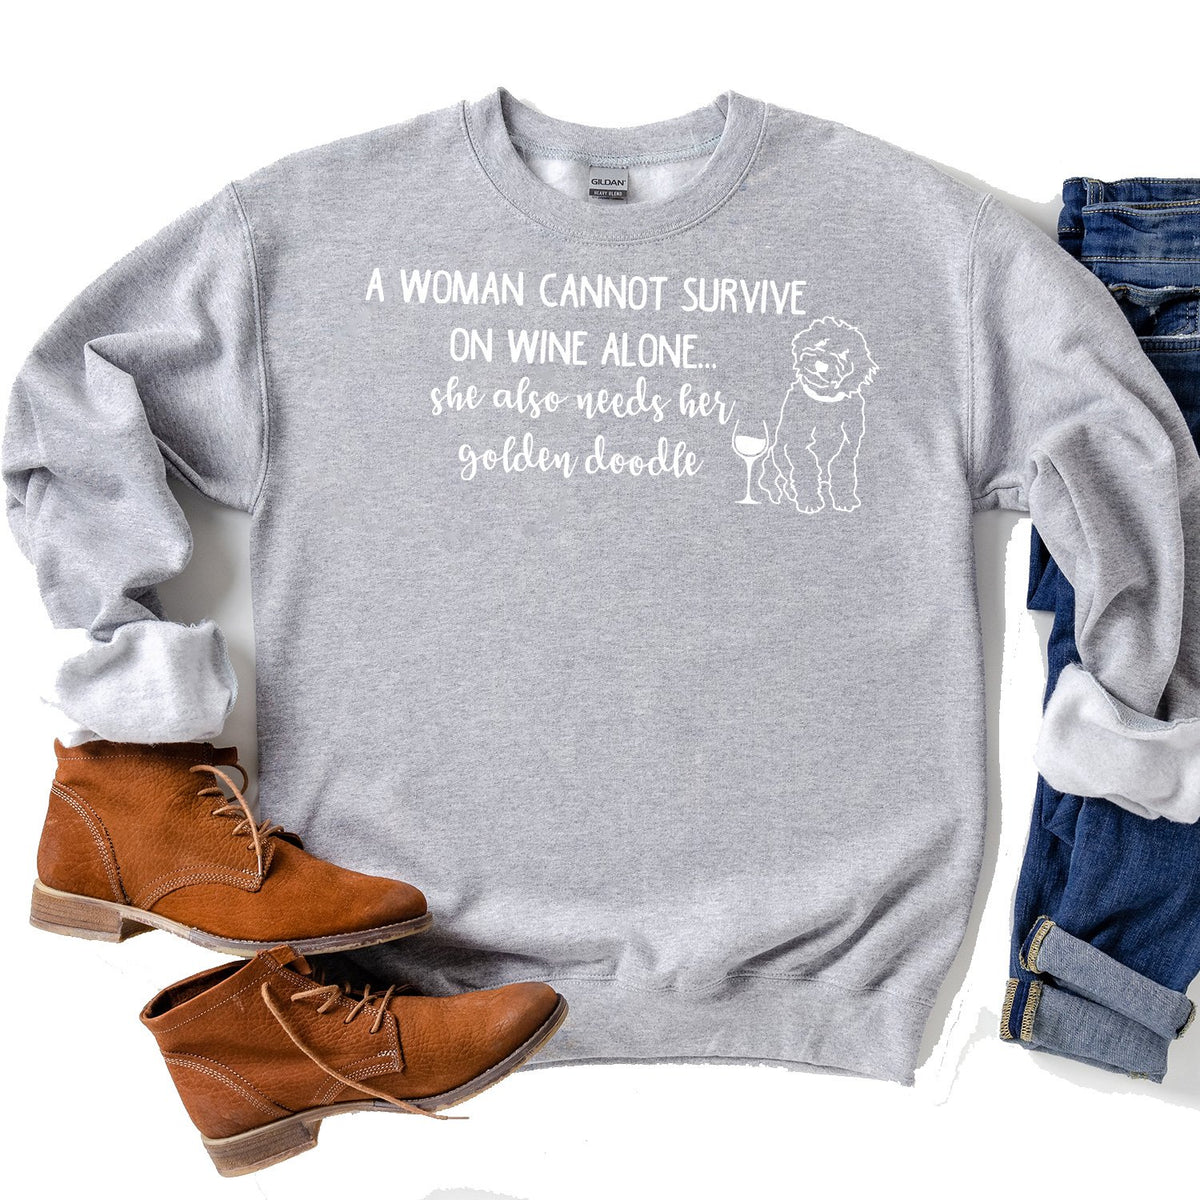 A Woman Cannot Survive on Wine Alone, She also Needs her Golden Doodle - Long Sleeve Heavy Crewneck Sweatshirt